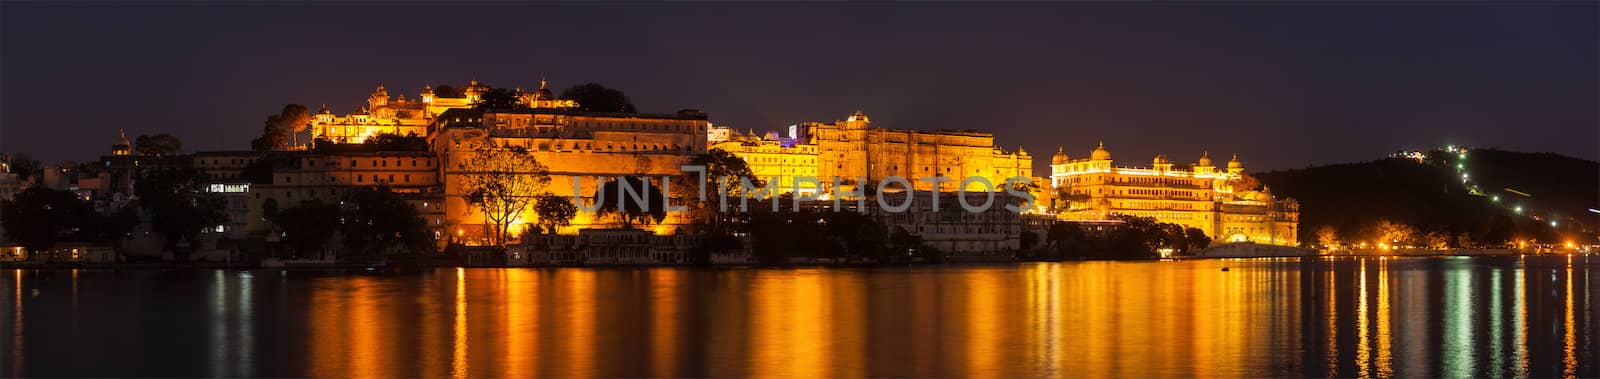 City Palace palace on Lake Pichola in twilight, Udaipur, Rajasth by dimol